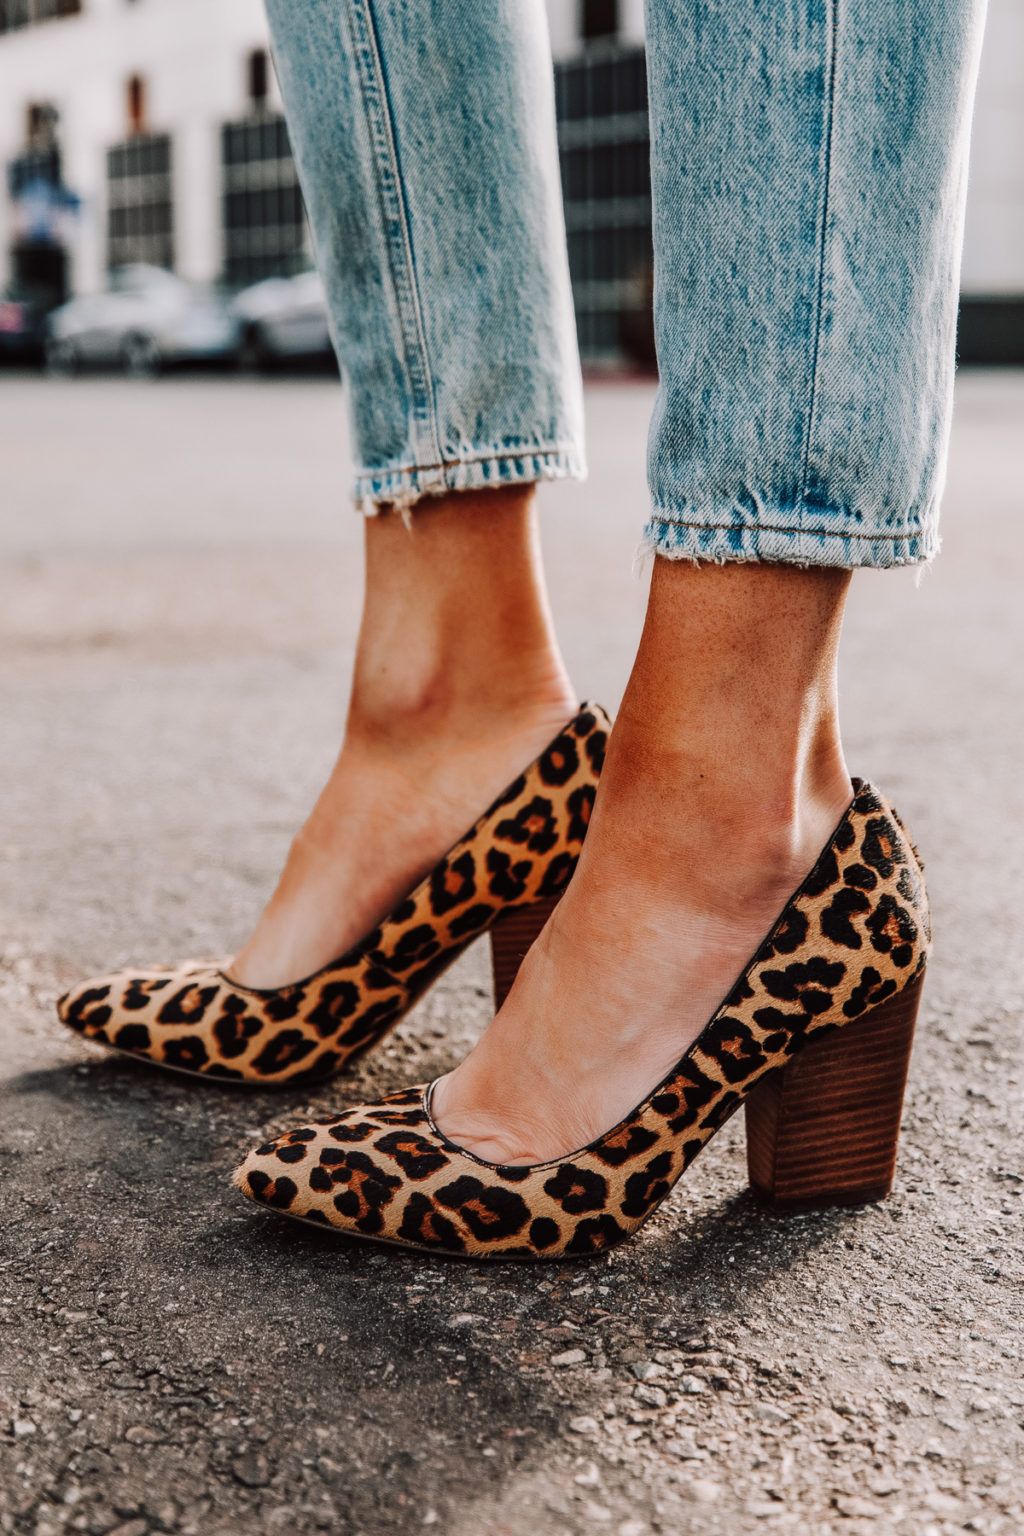 Getting leopard pumps for wearing in all
occasions